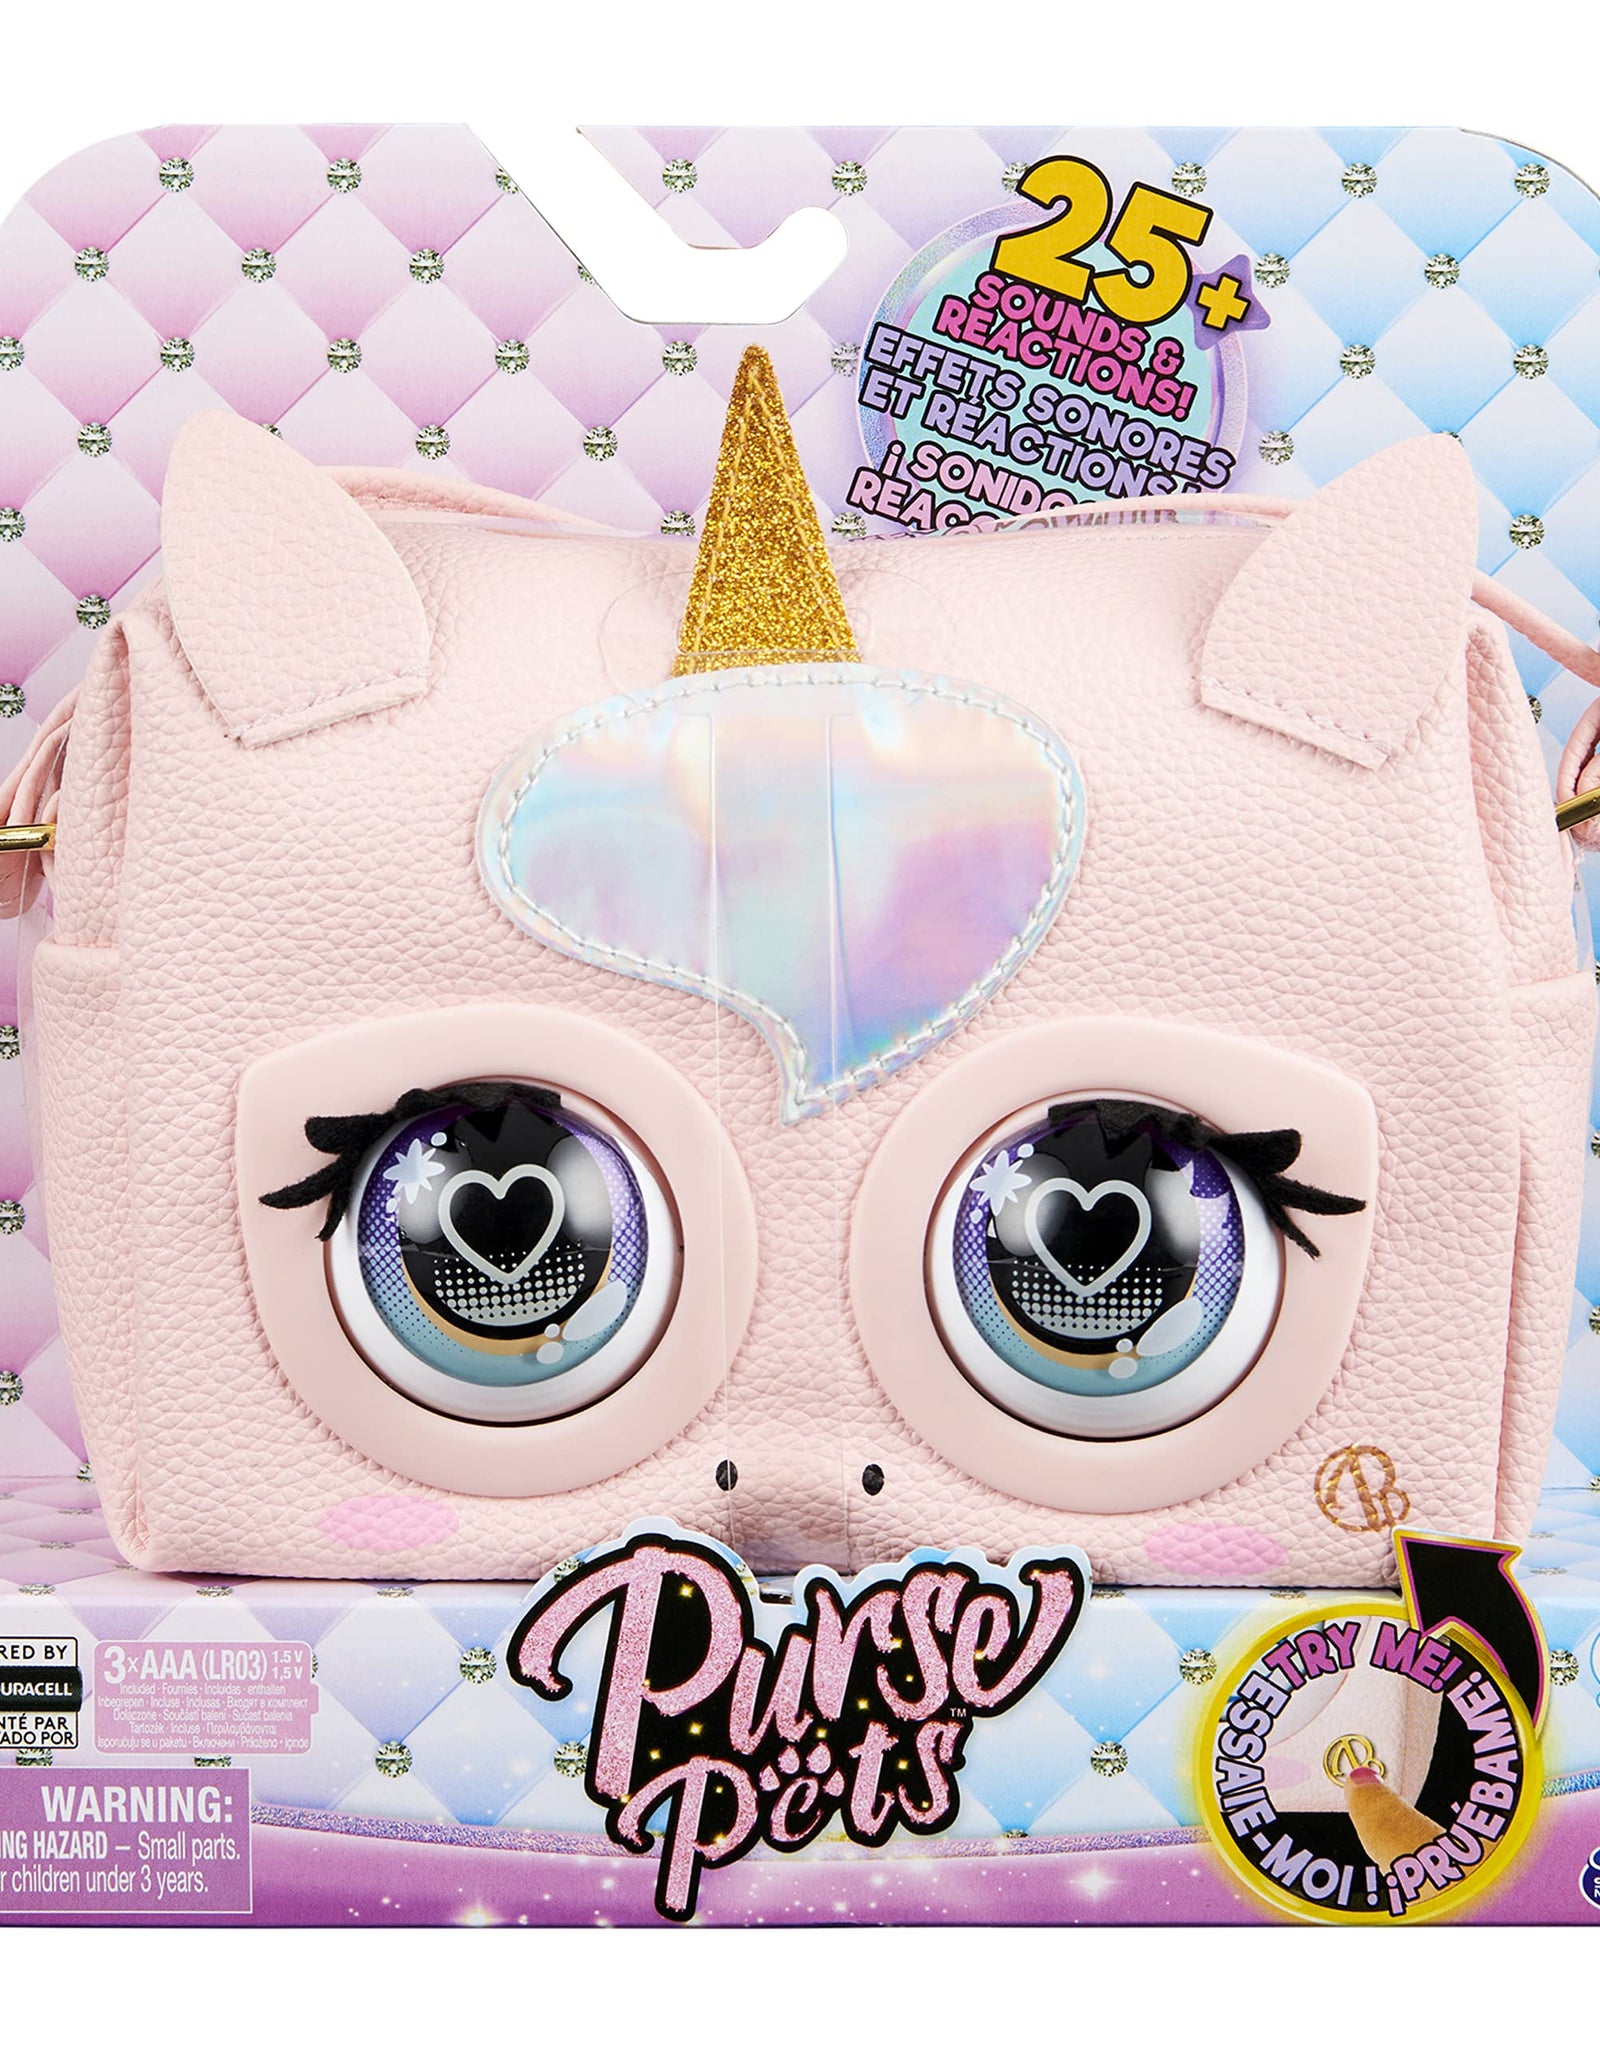 Purse Pets, Glamicorn Unicorn Interactive with Over 25 Sounds and Reactions, Kids Toys for Girls Ages 5 and up